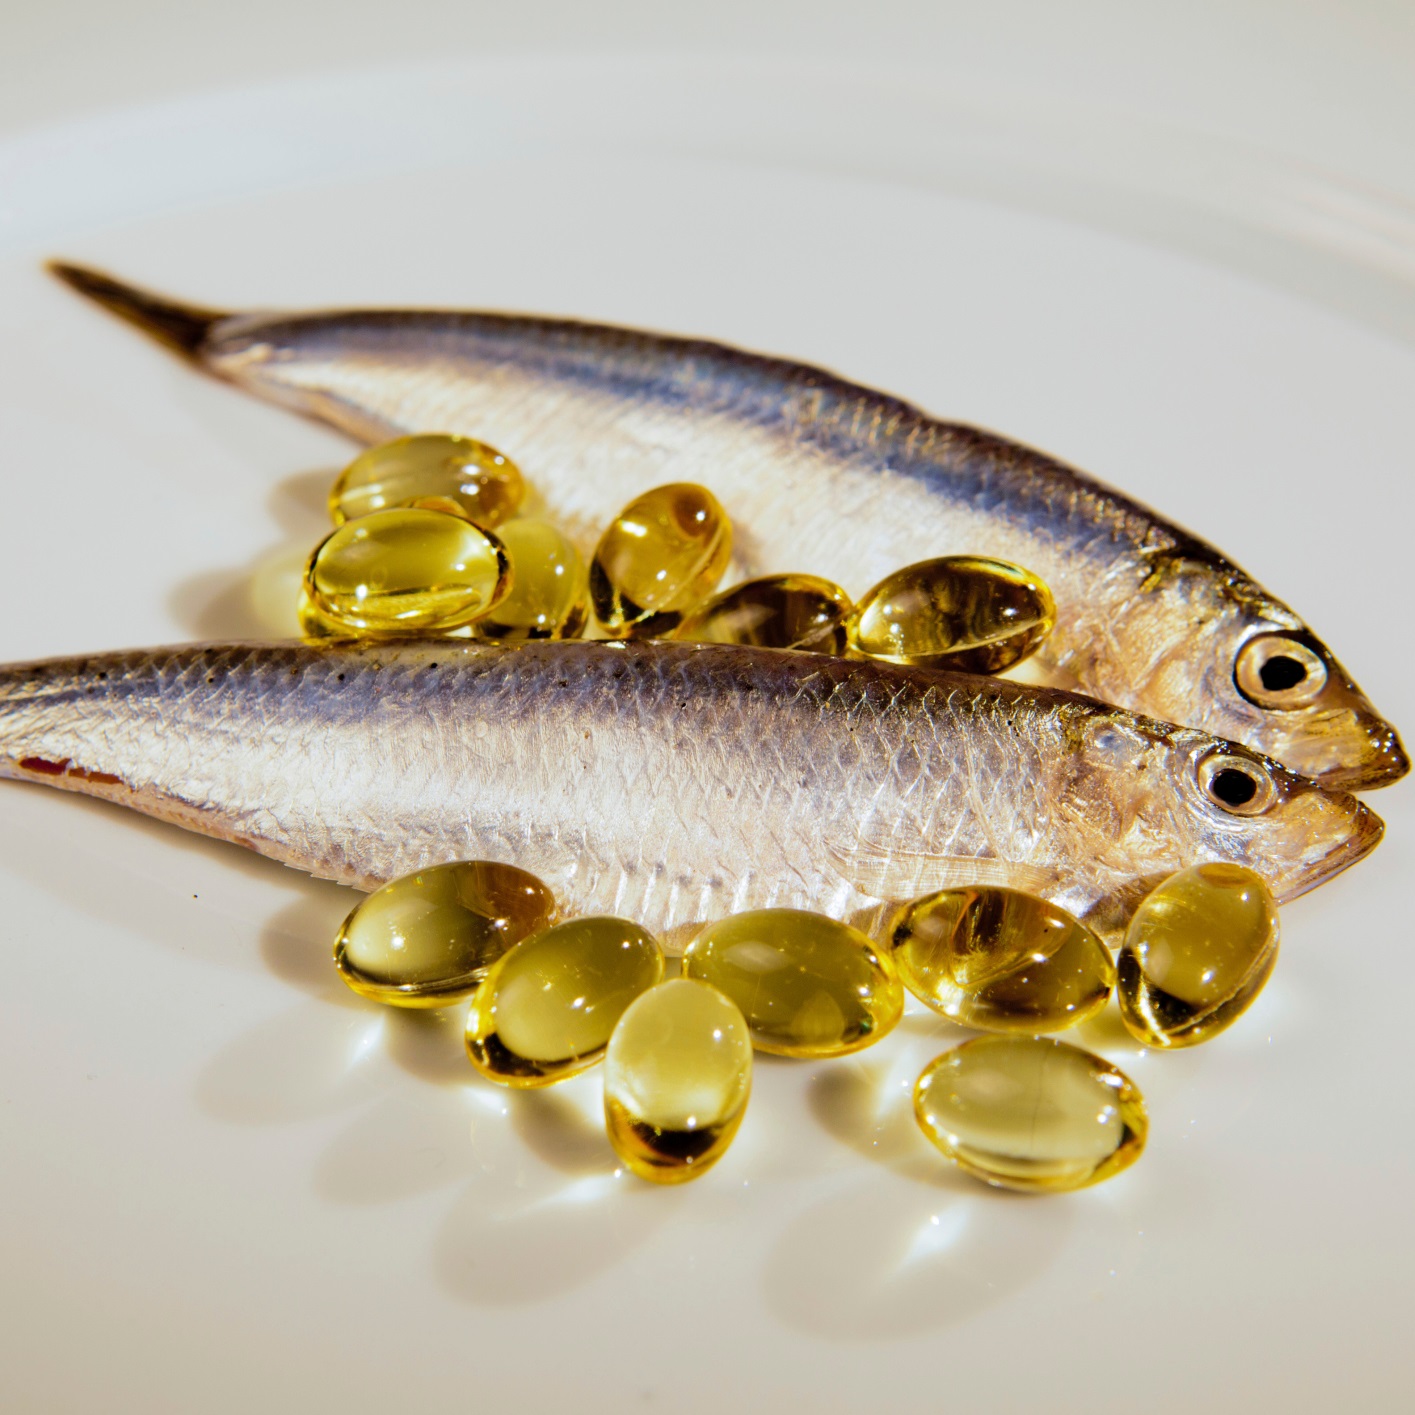 Reasons To Take Fish Oil Supplement